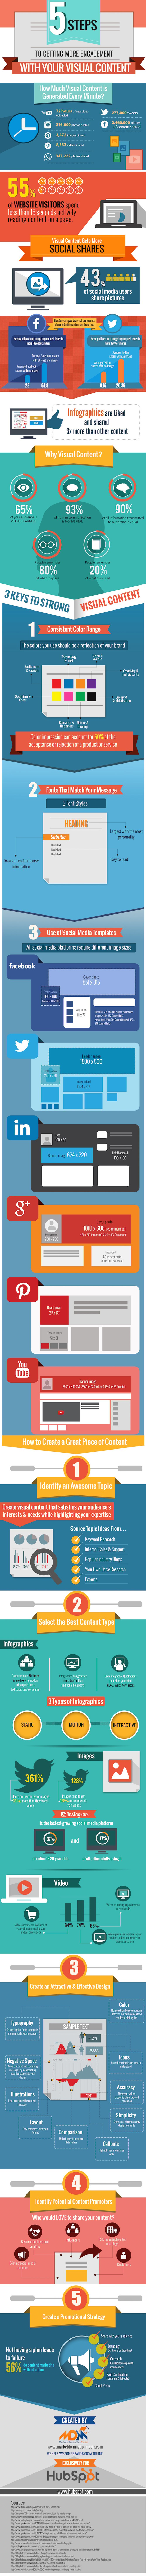 visual-content-engagement-boost-infographic